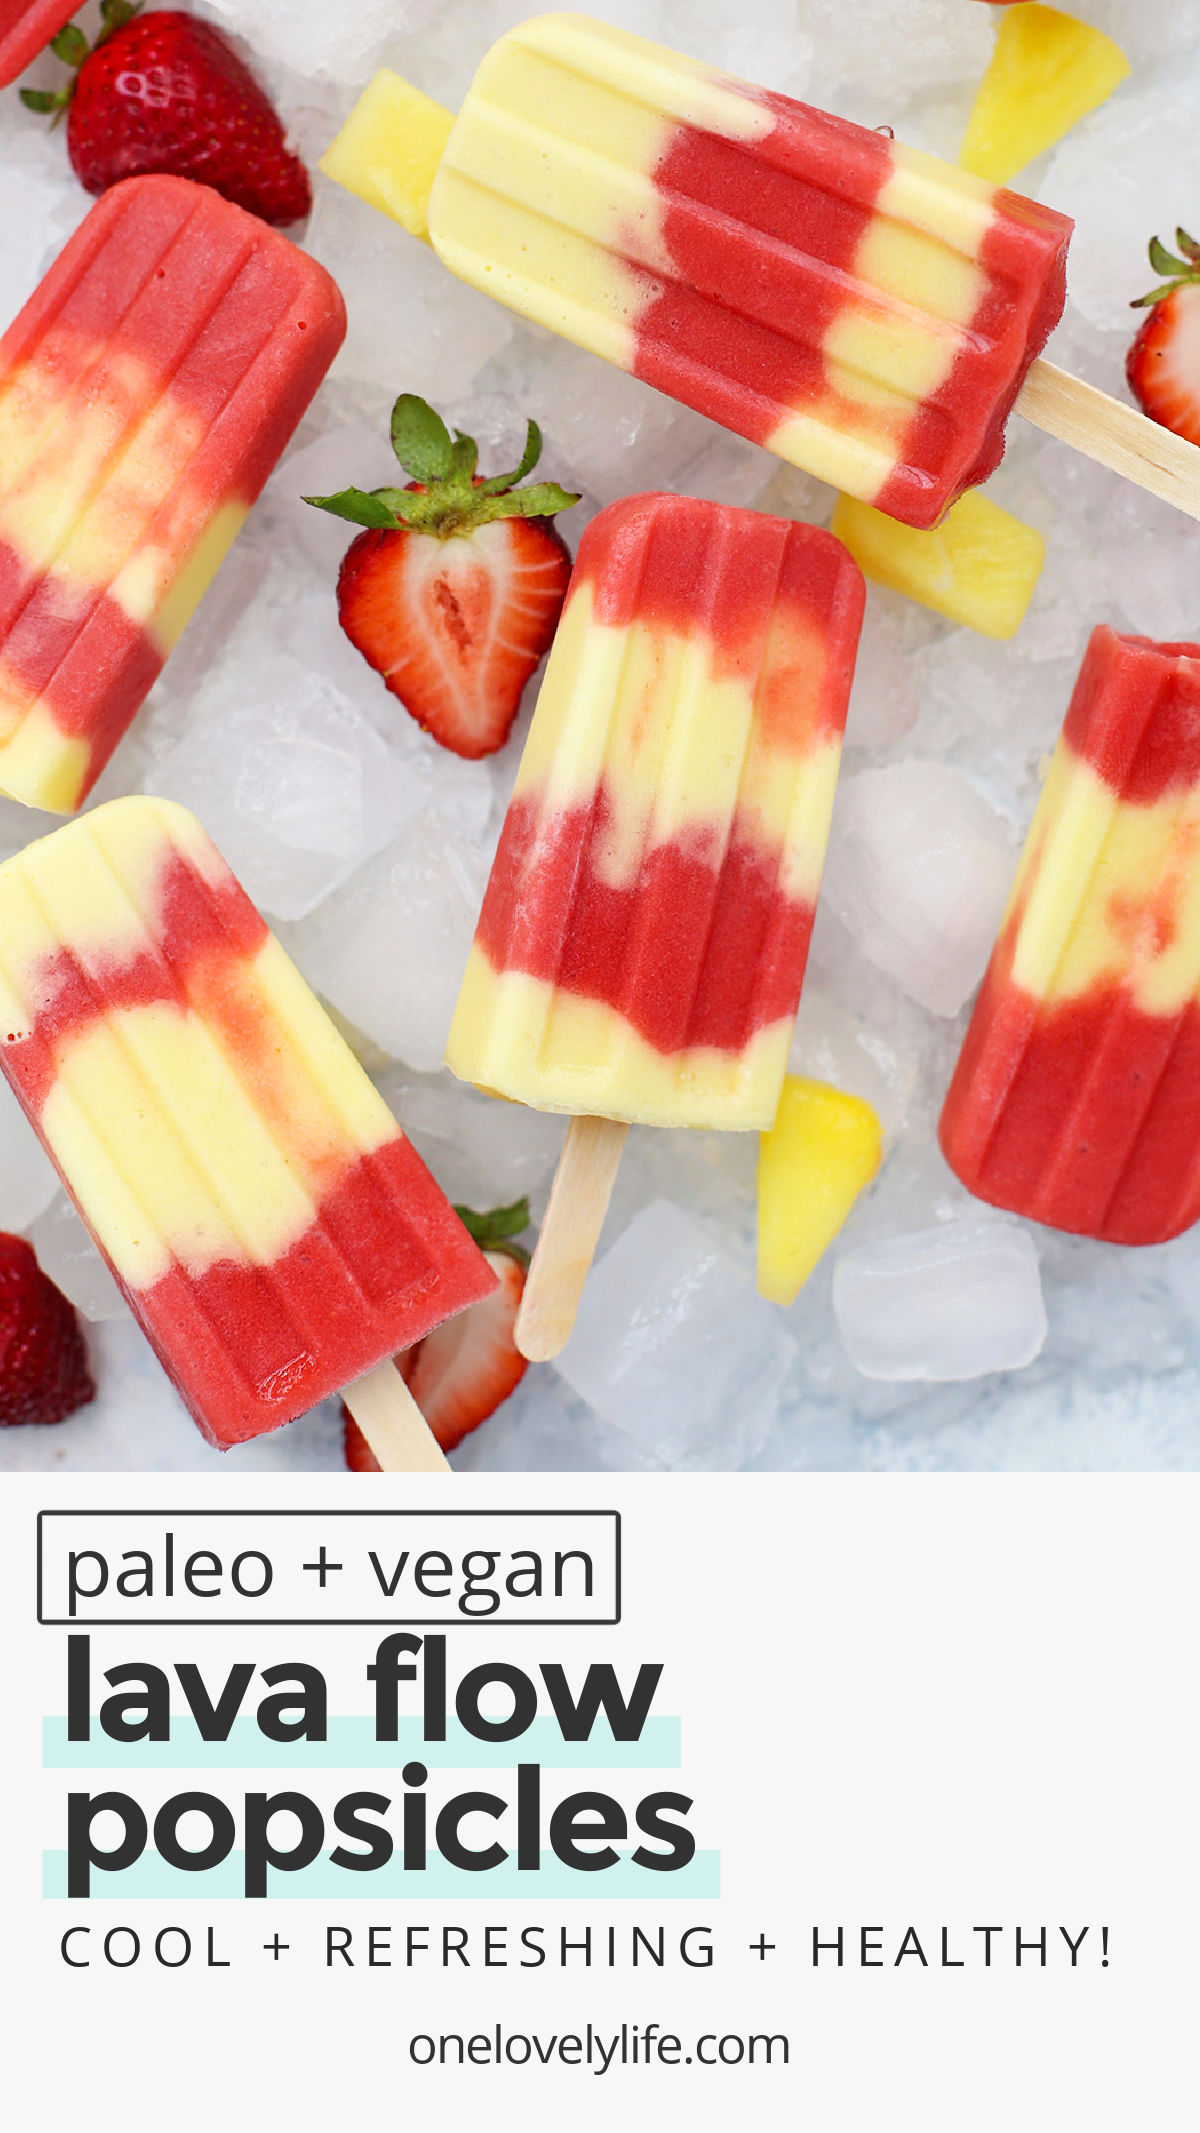 Lava Flow Popsicles - Creamy coconut pineapple swirled with fresh strawberry. Paleo, Vegan, and naturally sweetened! // Strawberry Pineapple Popsicles // Virgin Lava Flow Popsicles // fresh fruit popsicles // healthy popsicles // pineapple coconut popsicles // pina colada popsicles // homemade popsicle recipe // pineapple strawberry popsicles //